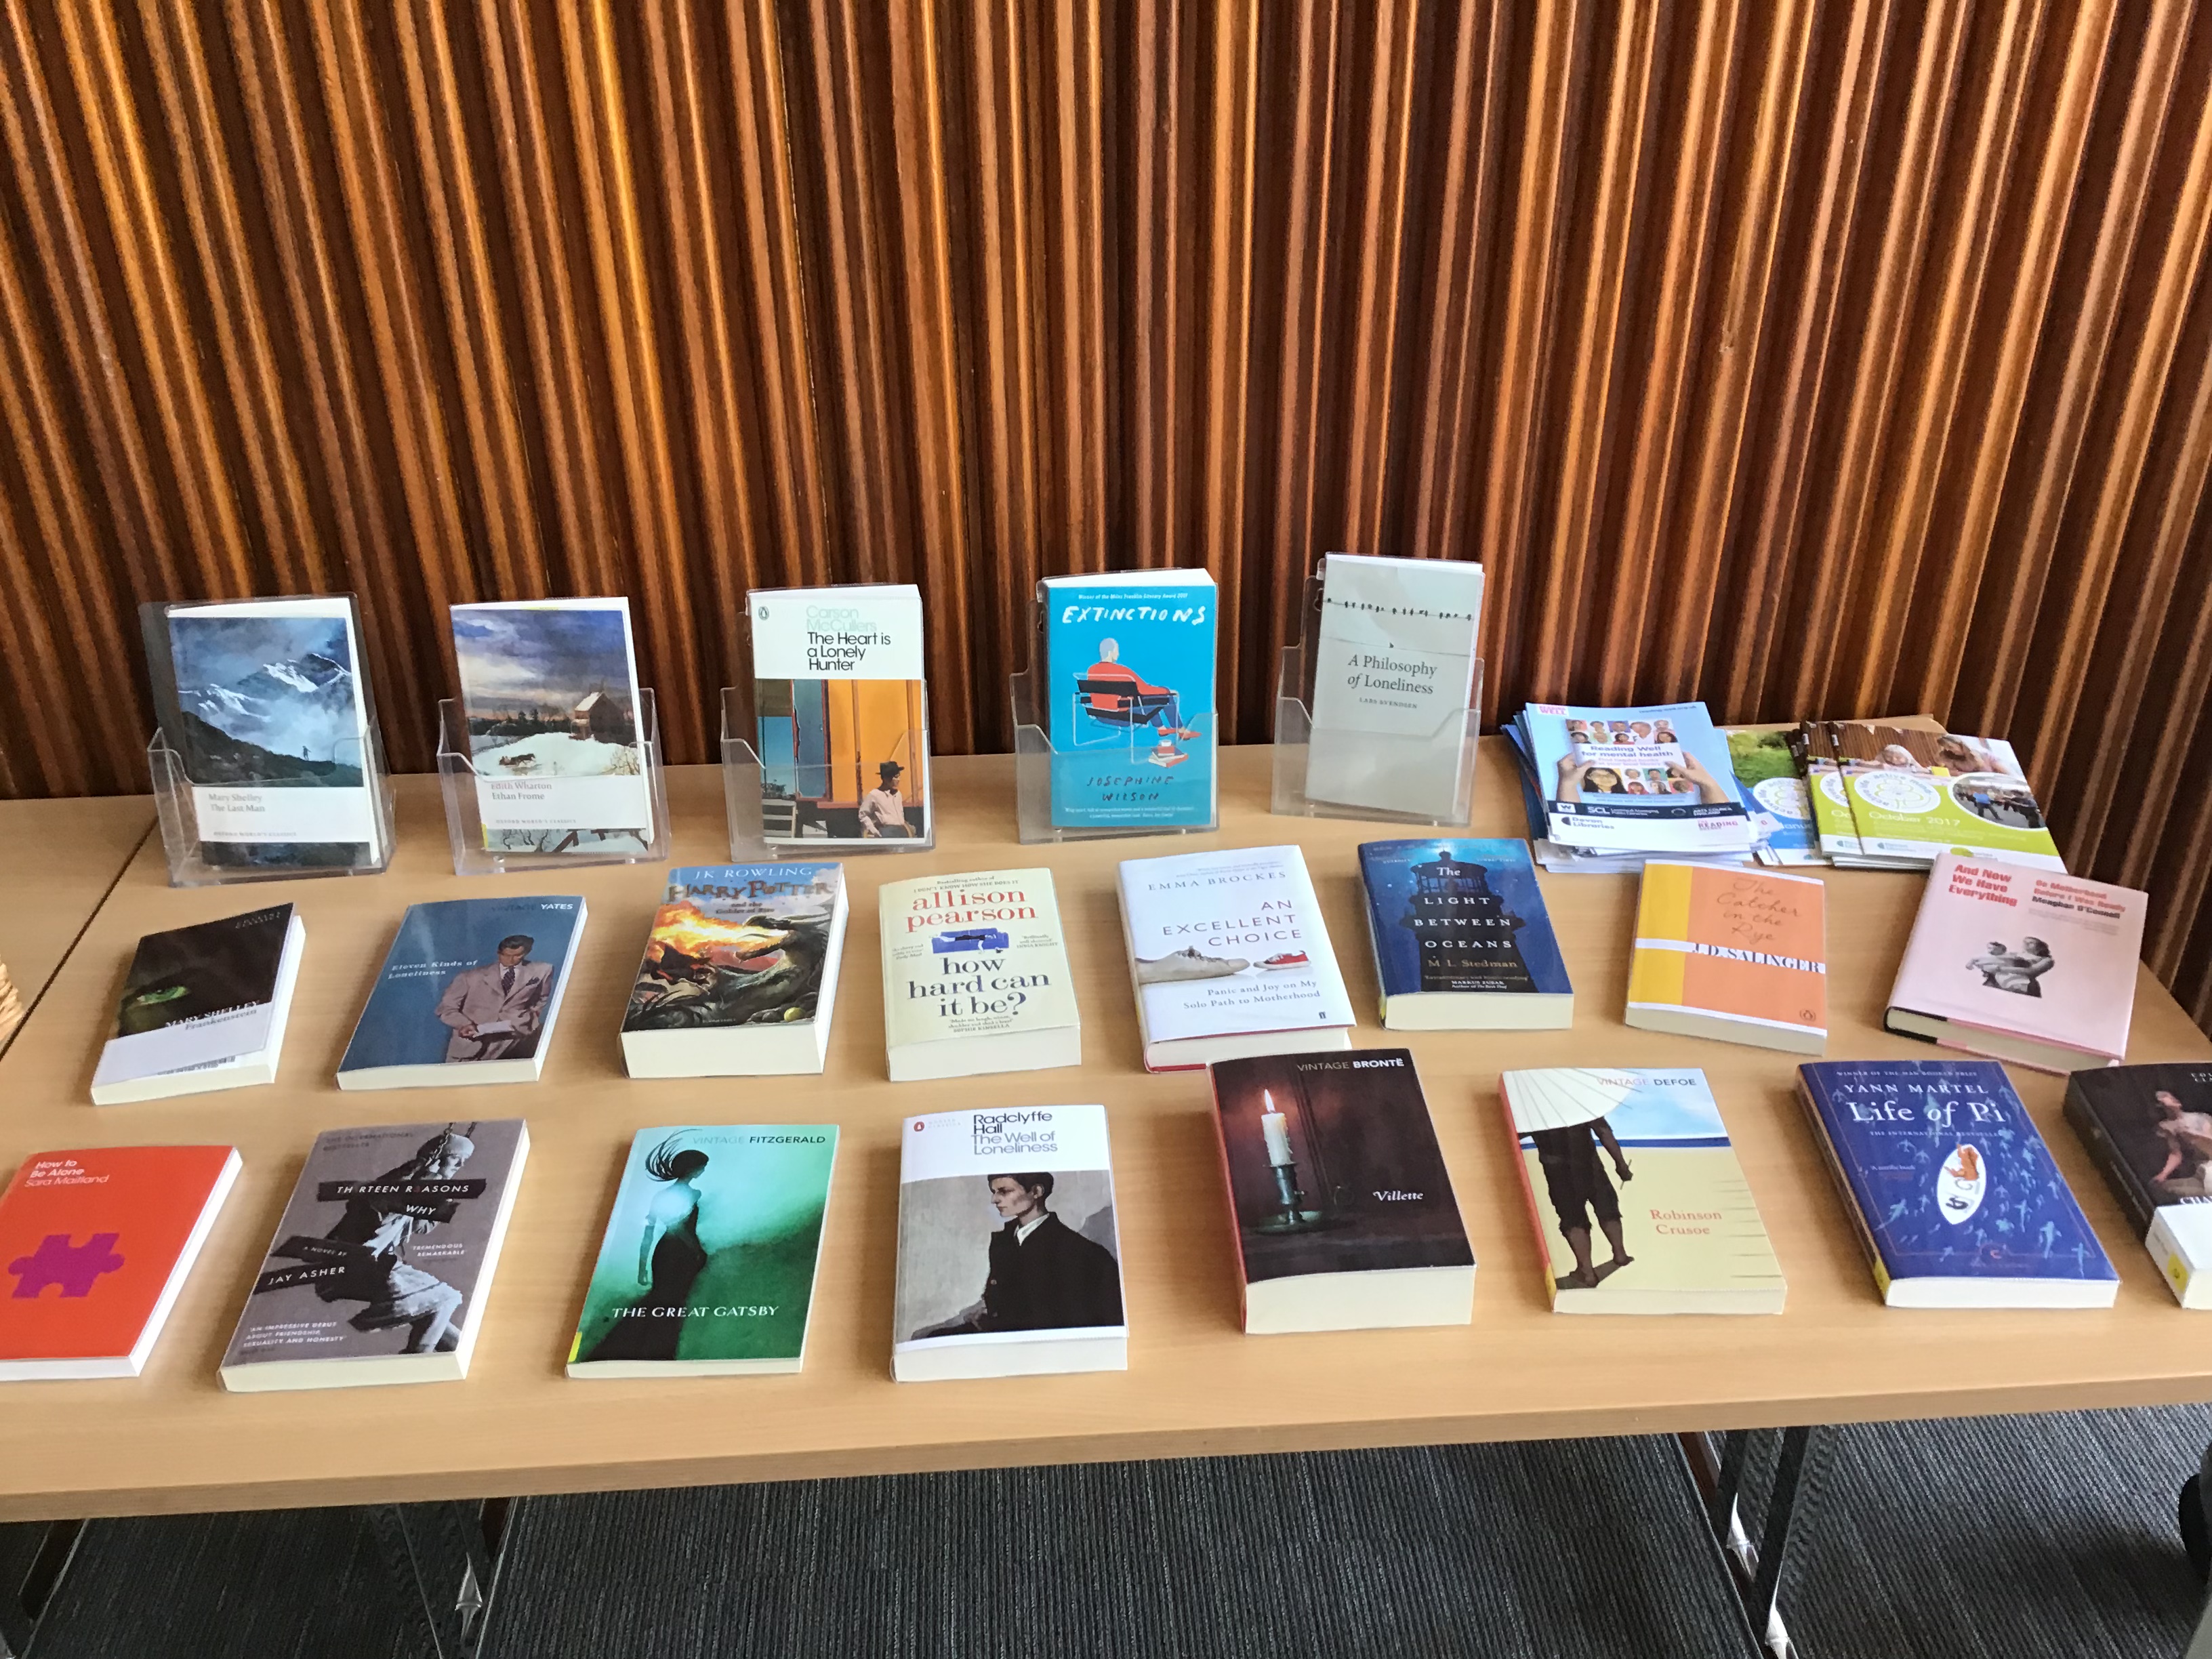 Display of books on a table